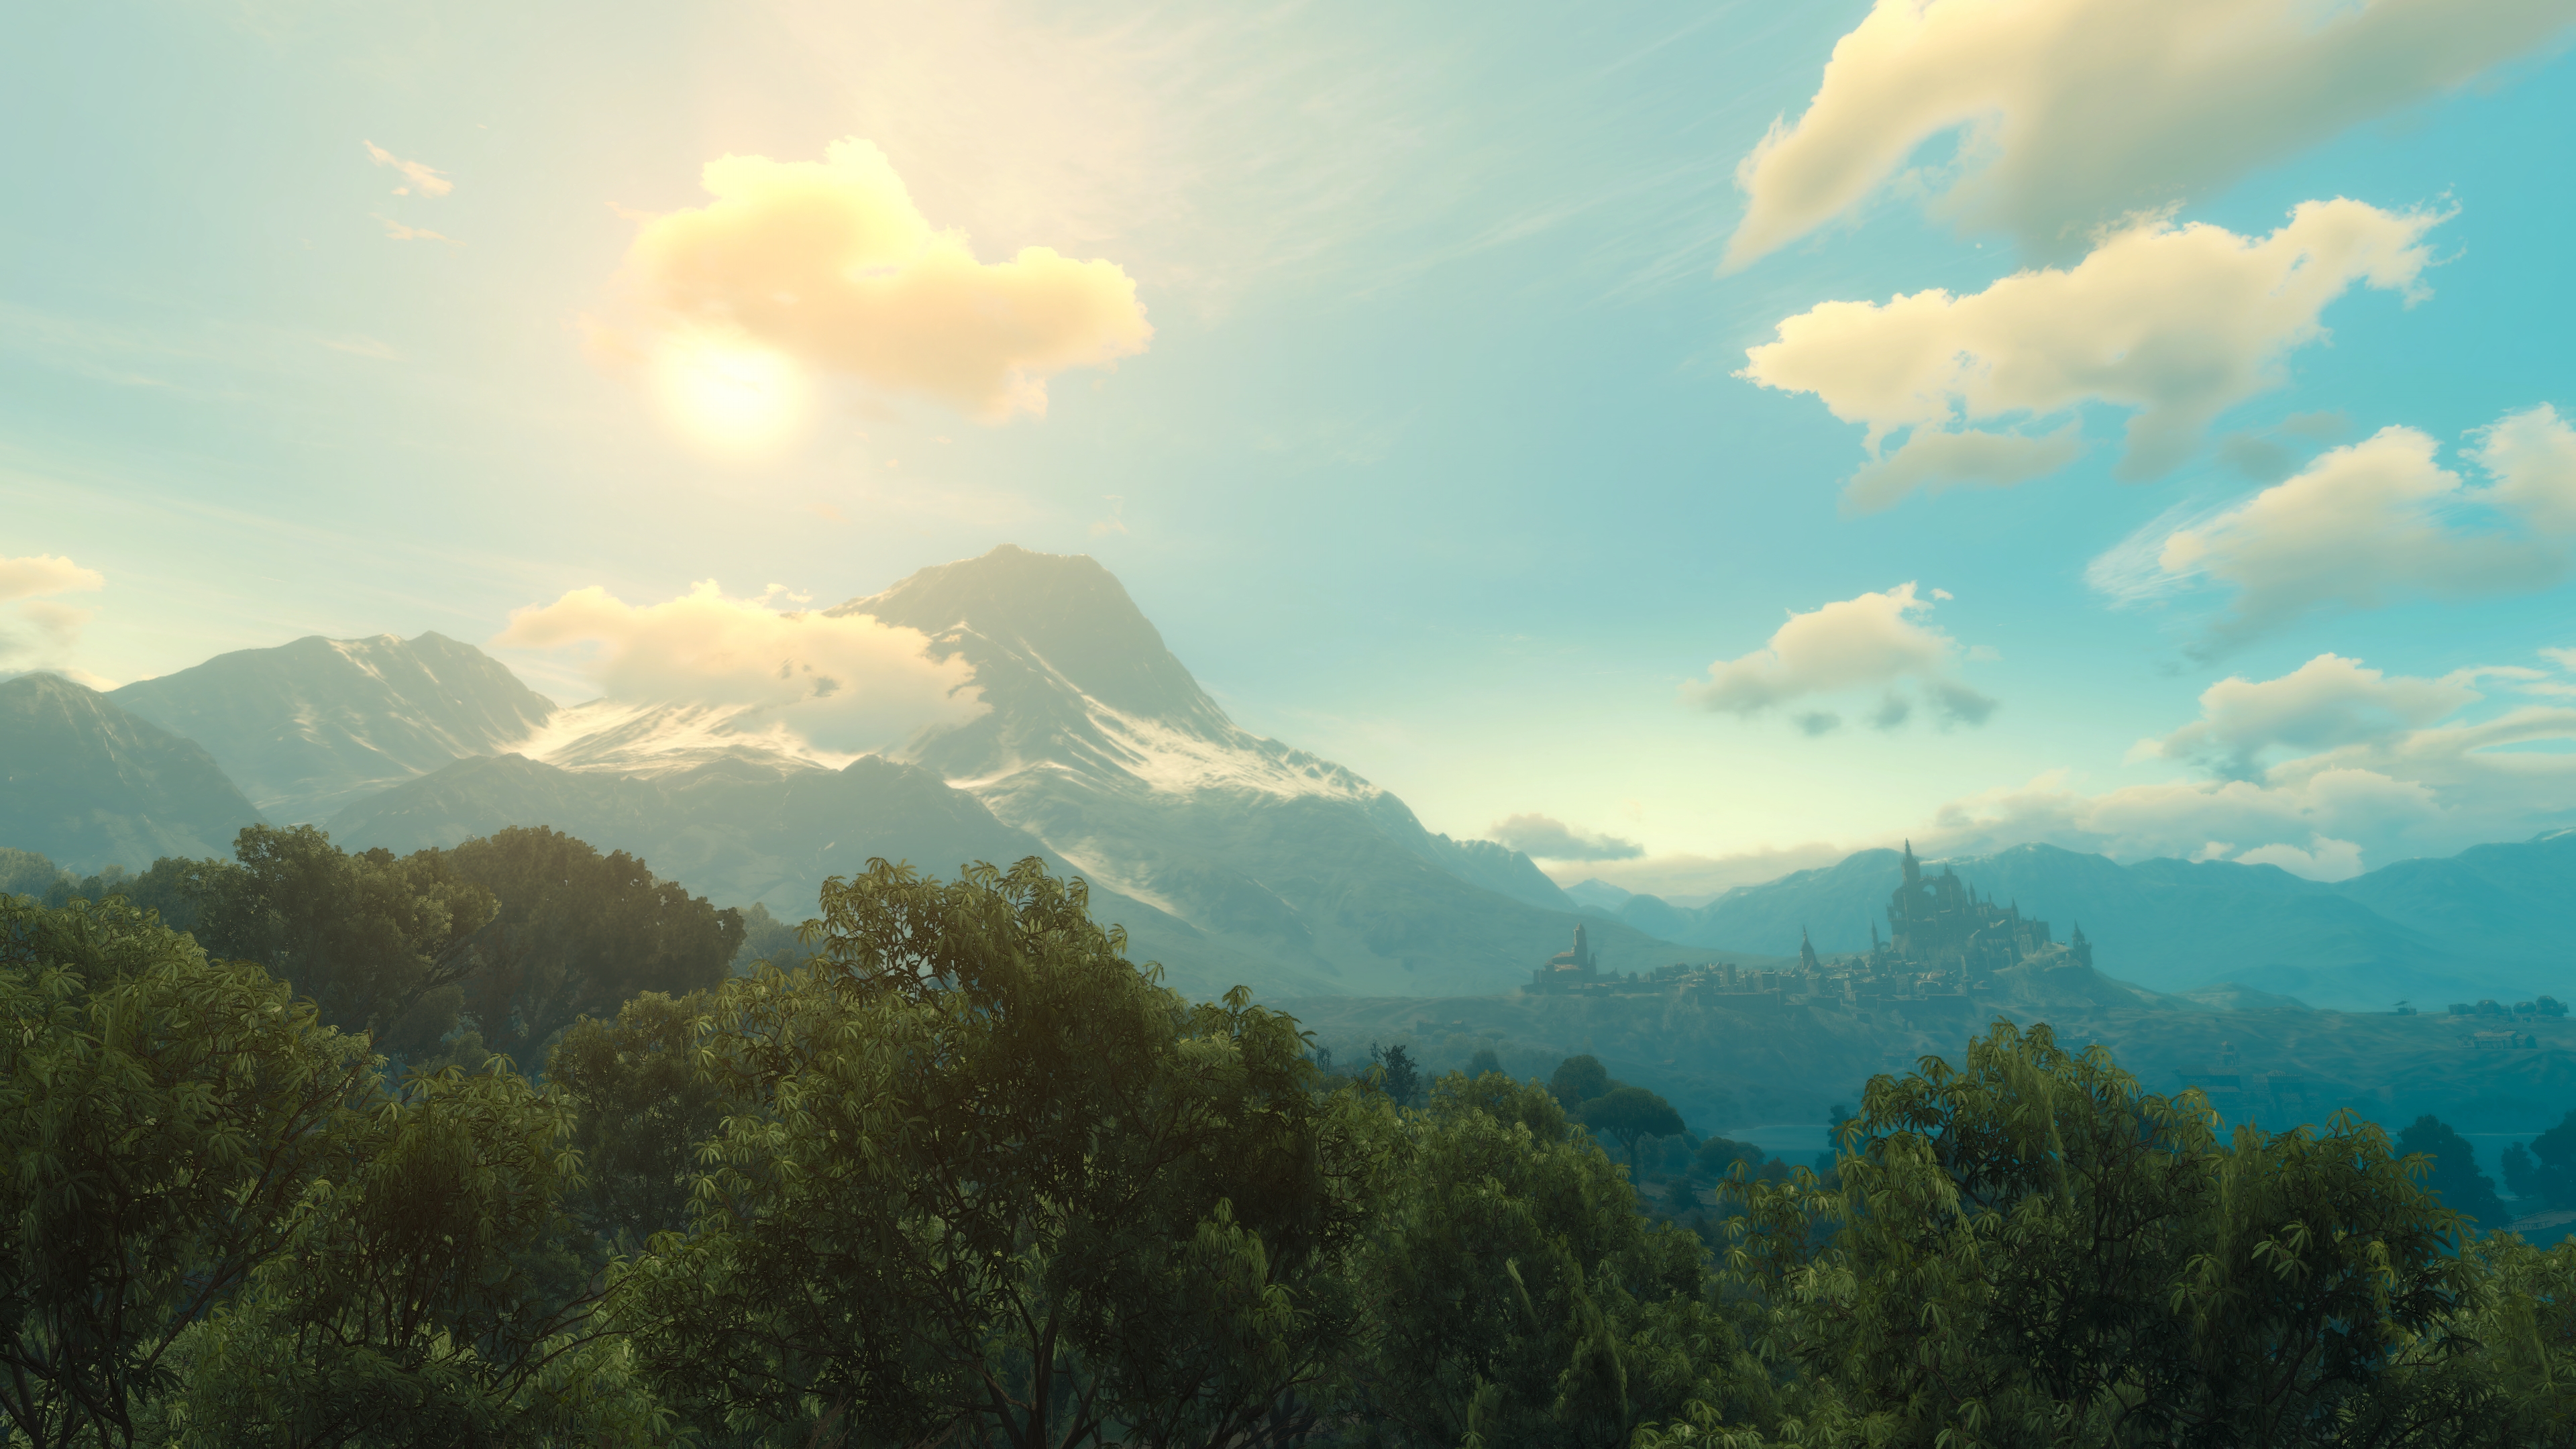 General 3840x2160 The Witcher 3: Wild Hunt PC gaming screen shot tussent The Witcher video games clouds video game art sunlight trees sky forest CGI nature Sun